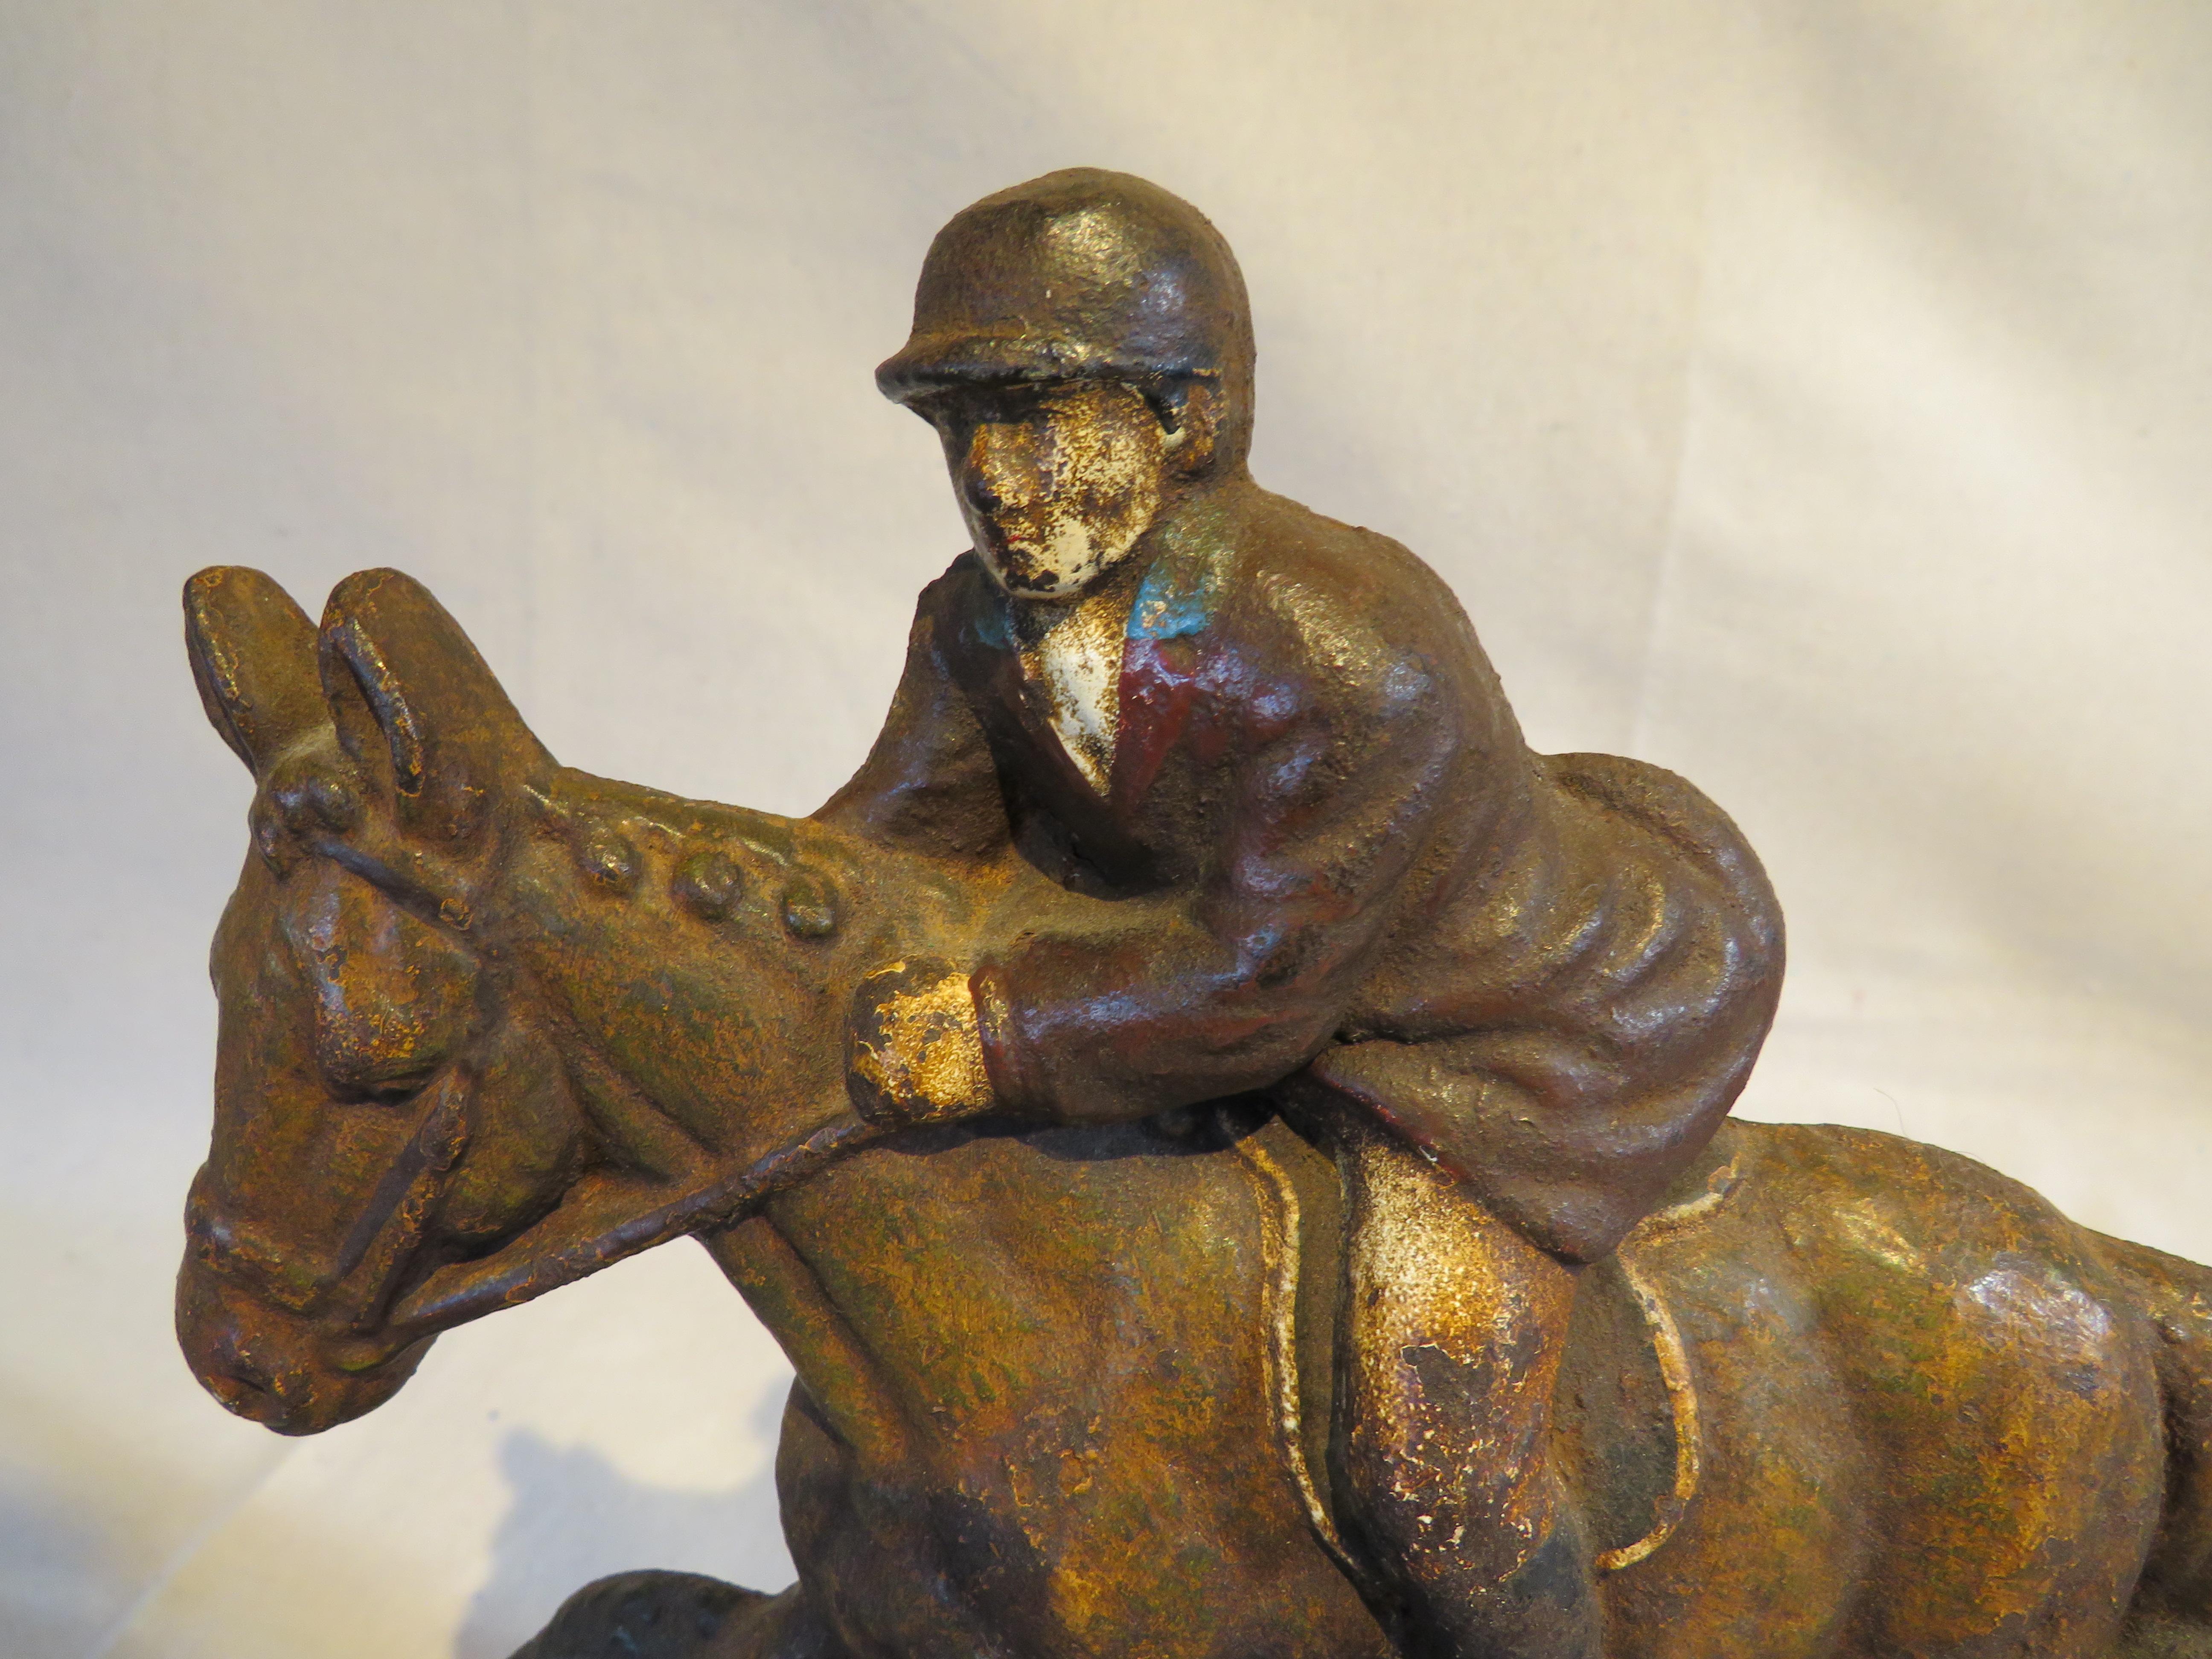 Sizeable 19th century cast iron doorstop of a man outfitted in equestrian gear jumping a horse over a gate. With vestiges of original painted surface throughout.